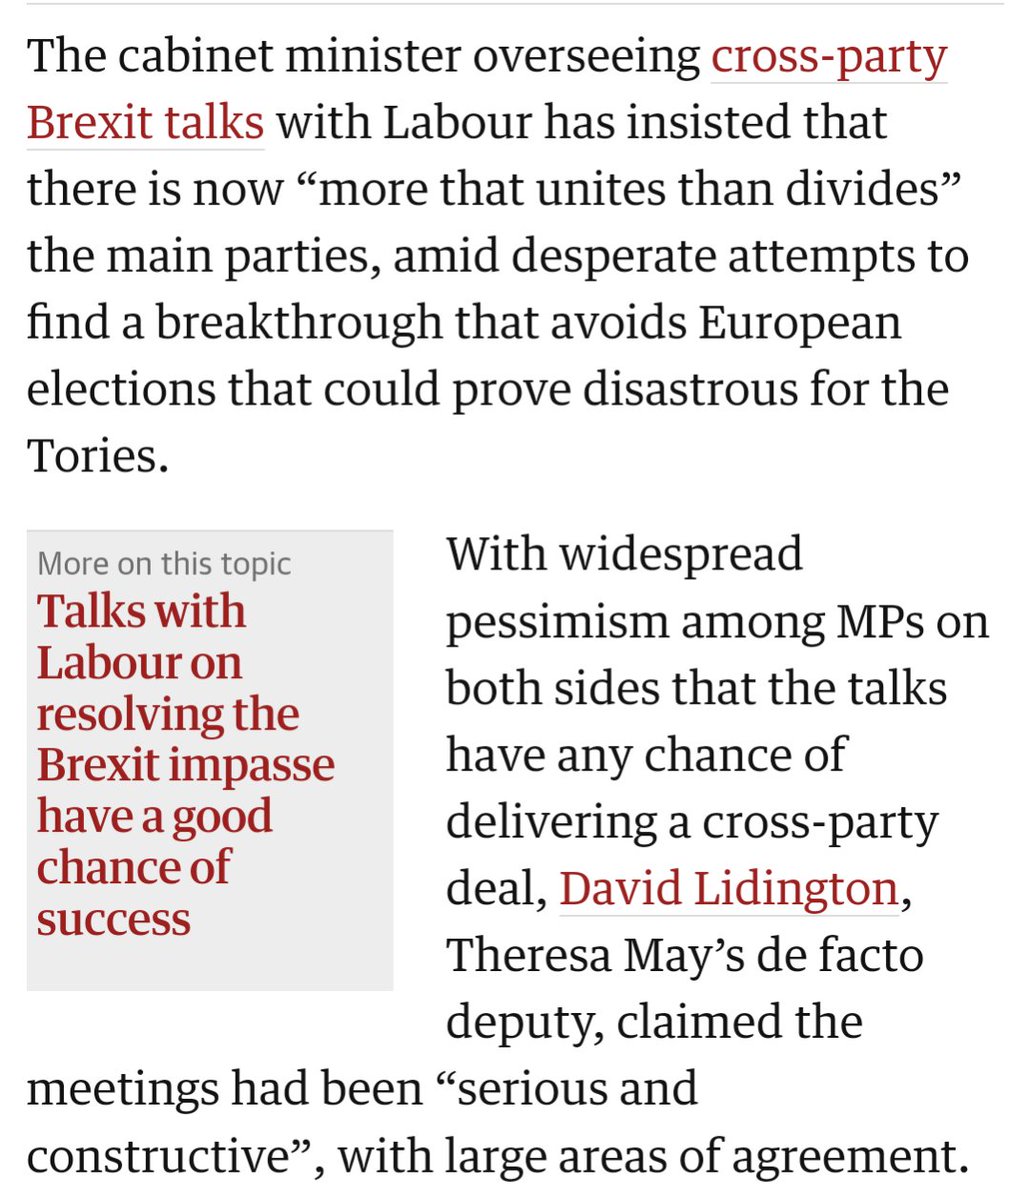 Throwback Tuesday.  Remembering the time when the Conservatives under May tried to push through the betrayal of Brexit with the help of Labour.

Where they failed, Sunak succeeded with the Windsor Framework and Starmer finally got his way back to EU alignment.